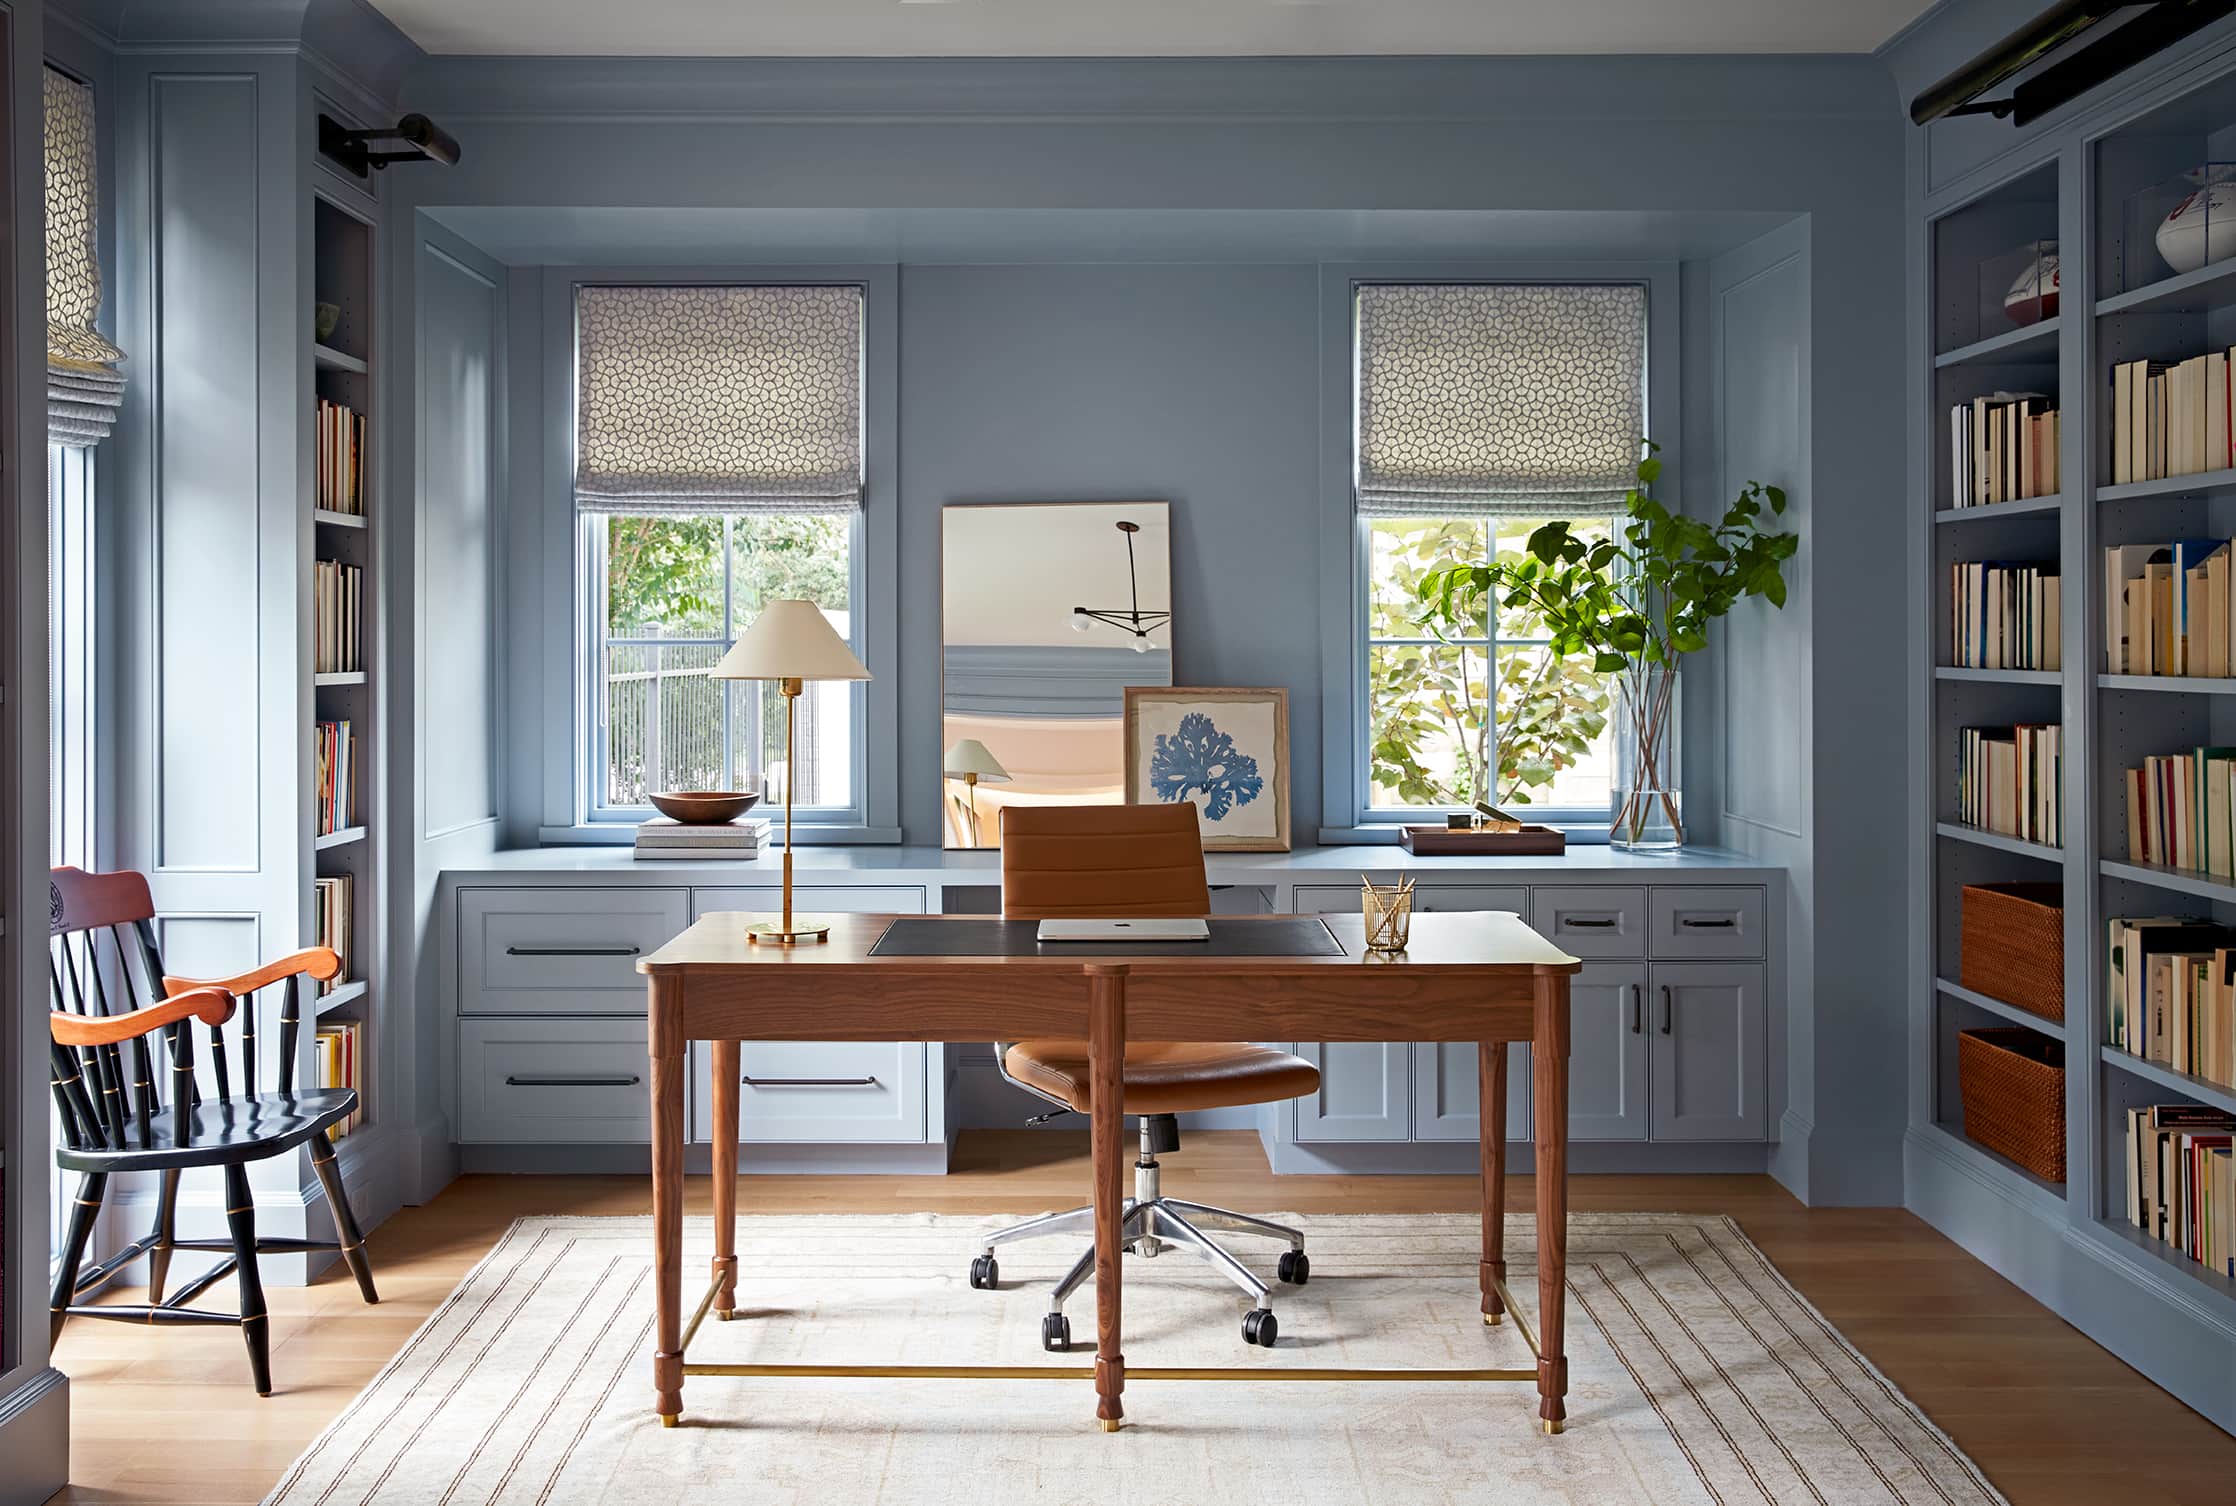 A stunning home office designed by Laura U Design Collective.